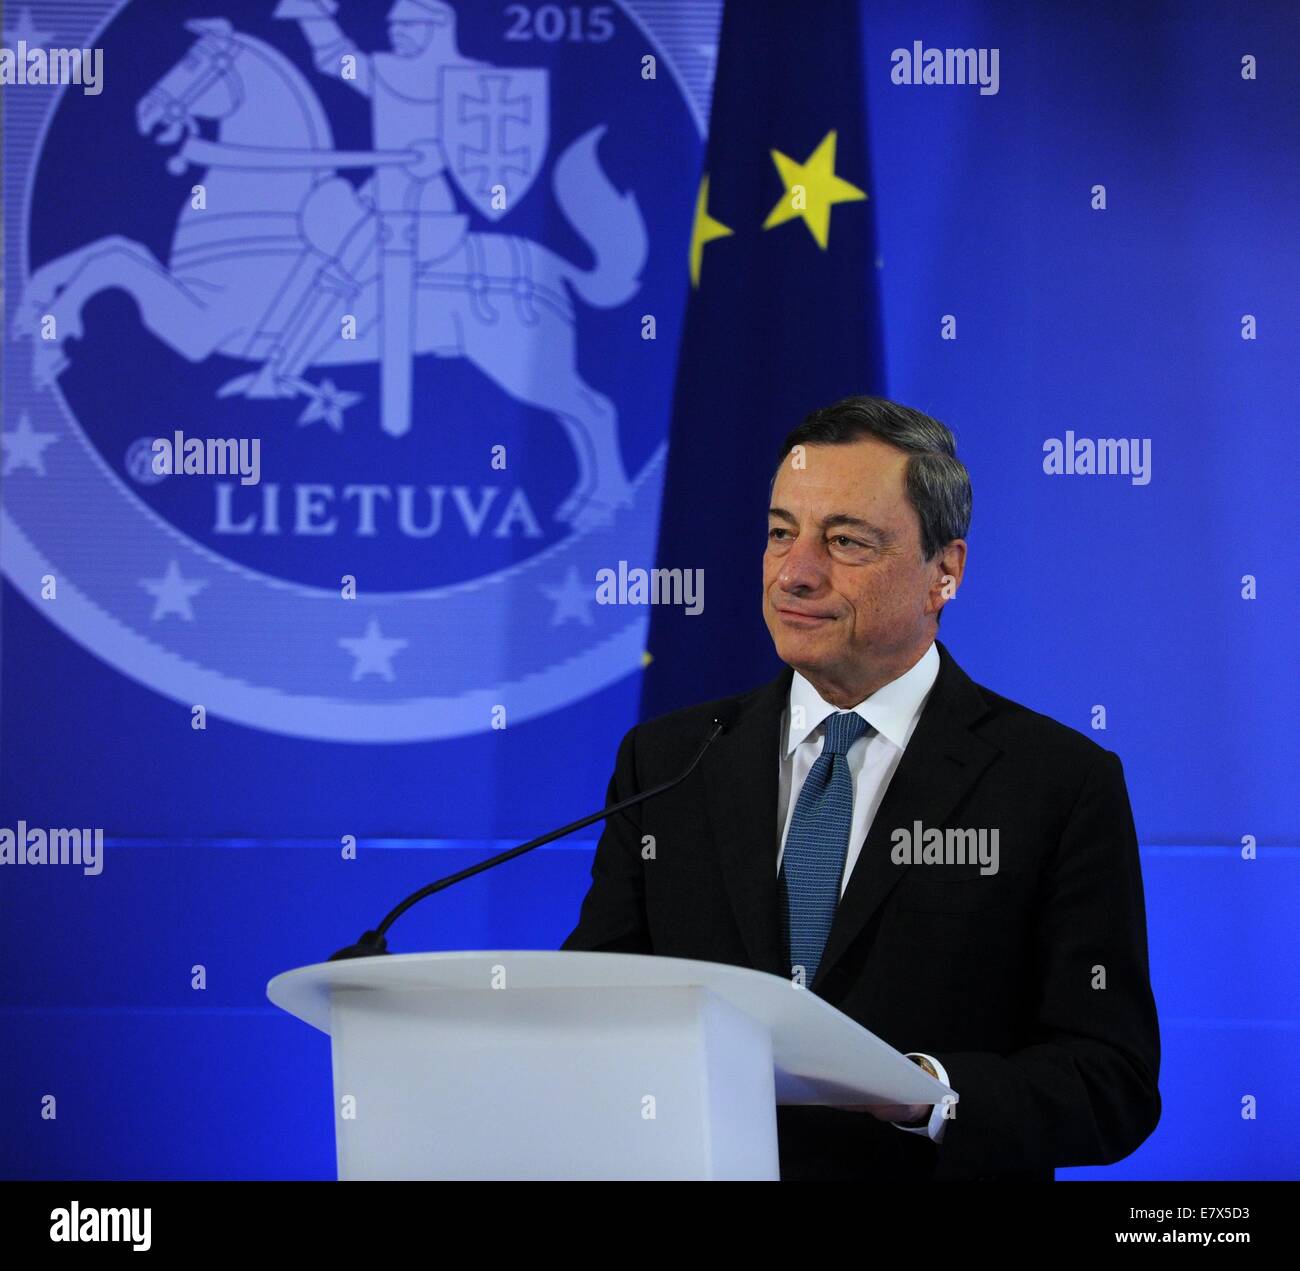 Vilnius, Lithuania. 25th Sep, 2014. European Central Bank (ECB)'s president Mario Draghi addresses in Vilnius, Lithuania, on Sept. 25, 2014. President of the ECB Mario Draghi handed over a Euro Star to chairman of Lithuania's Central Bank here on Thursday, a sign symbolizing Lithuania's membership in the euro area. Credit:  Alfredas Pliadis/Xinhua/Alamy Live News Stock Photo